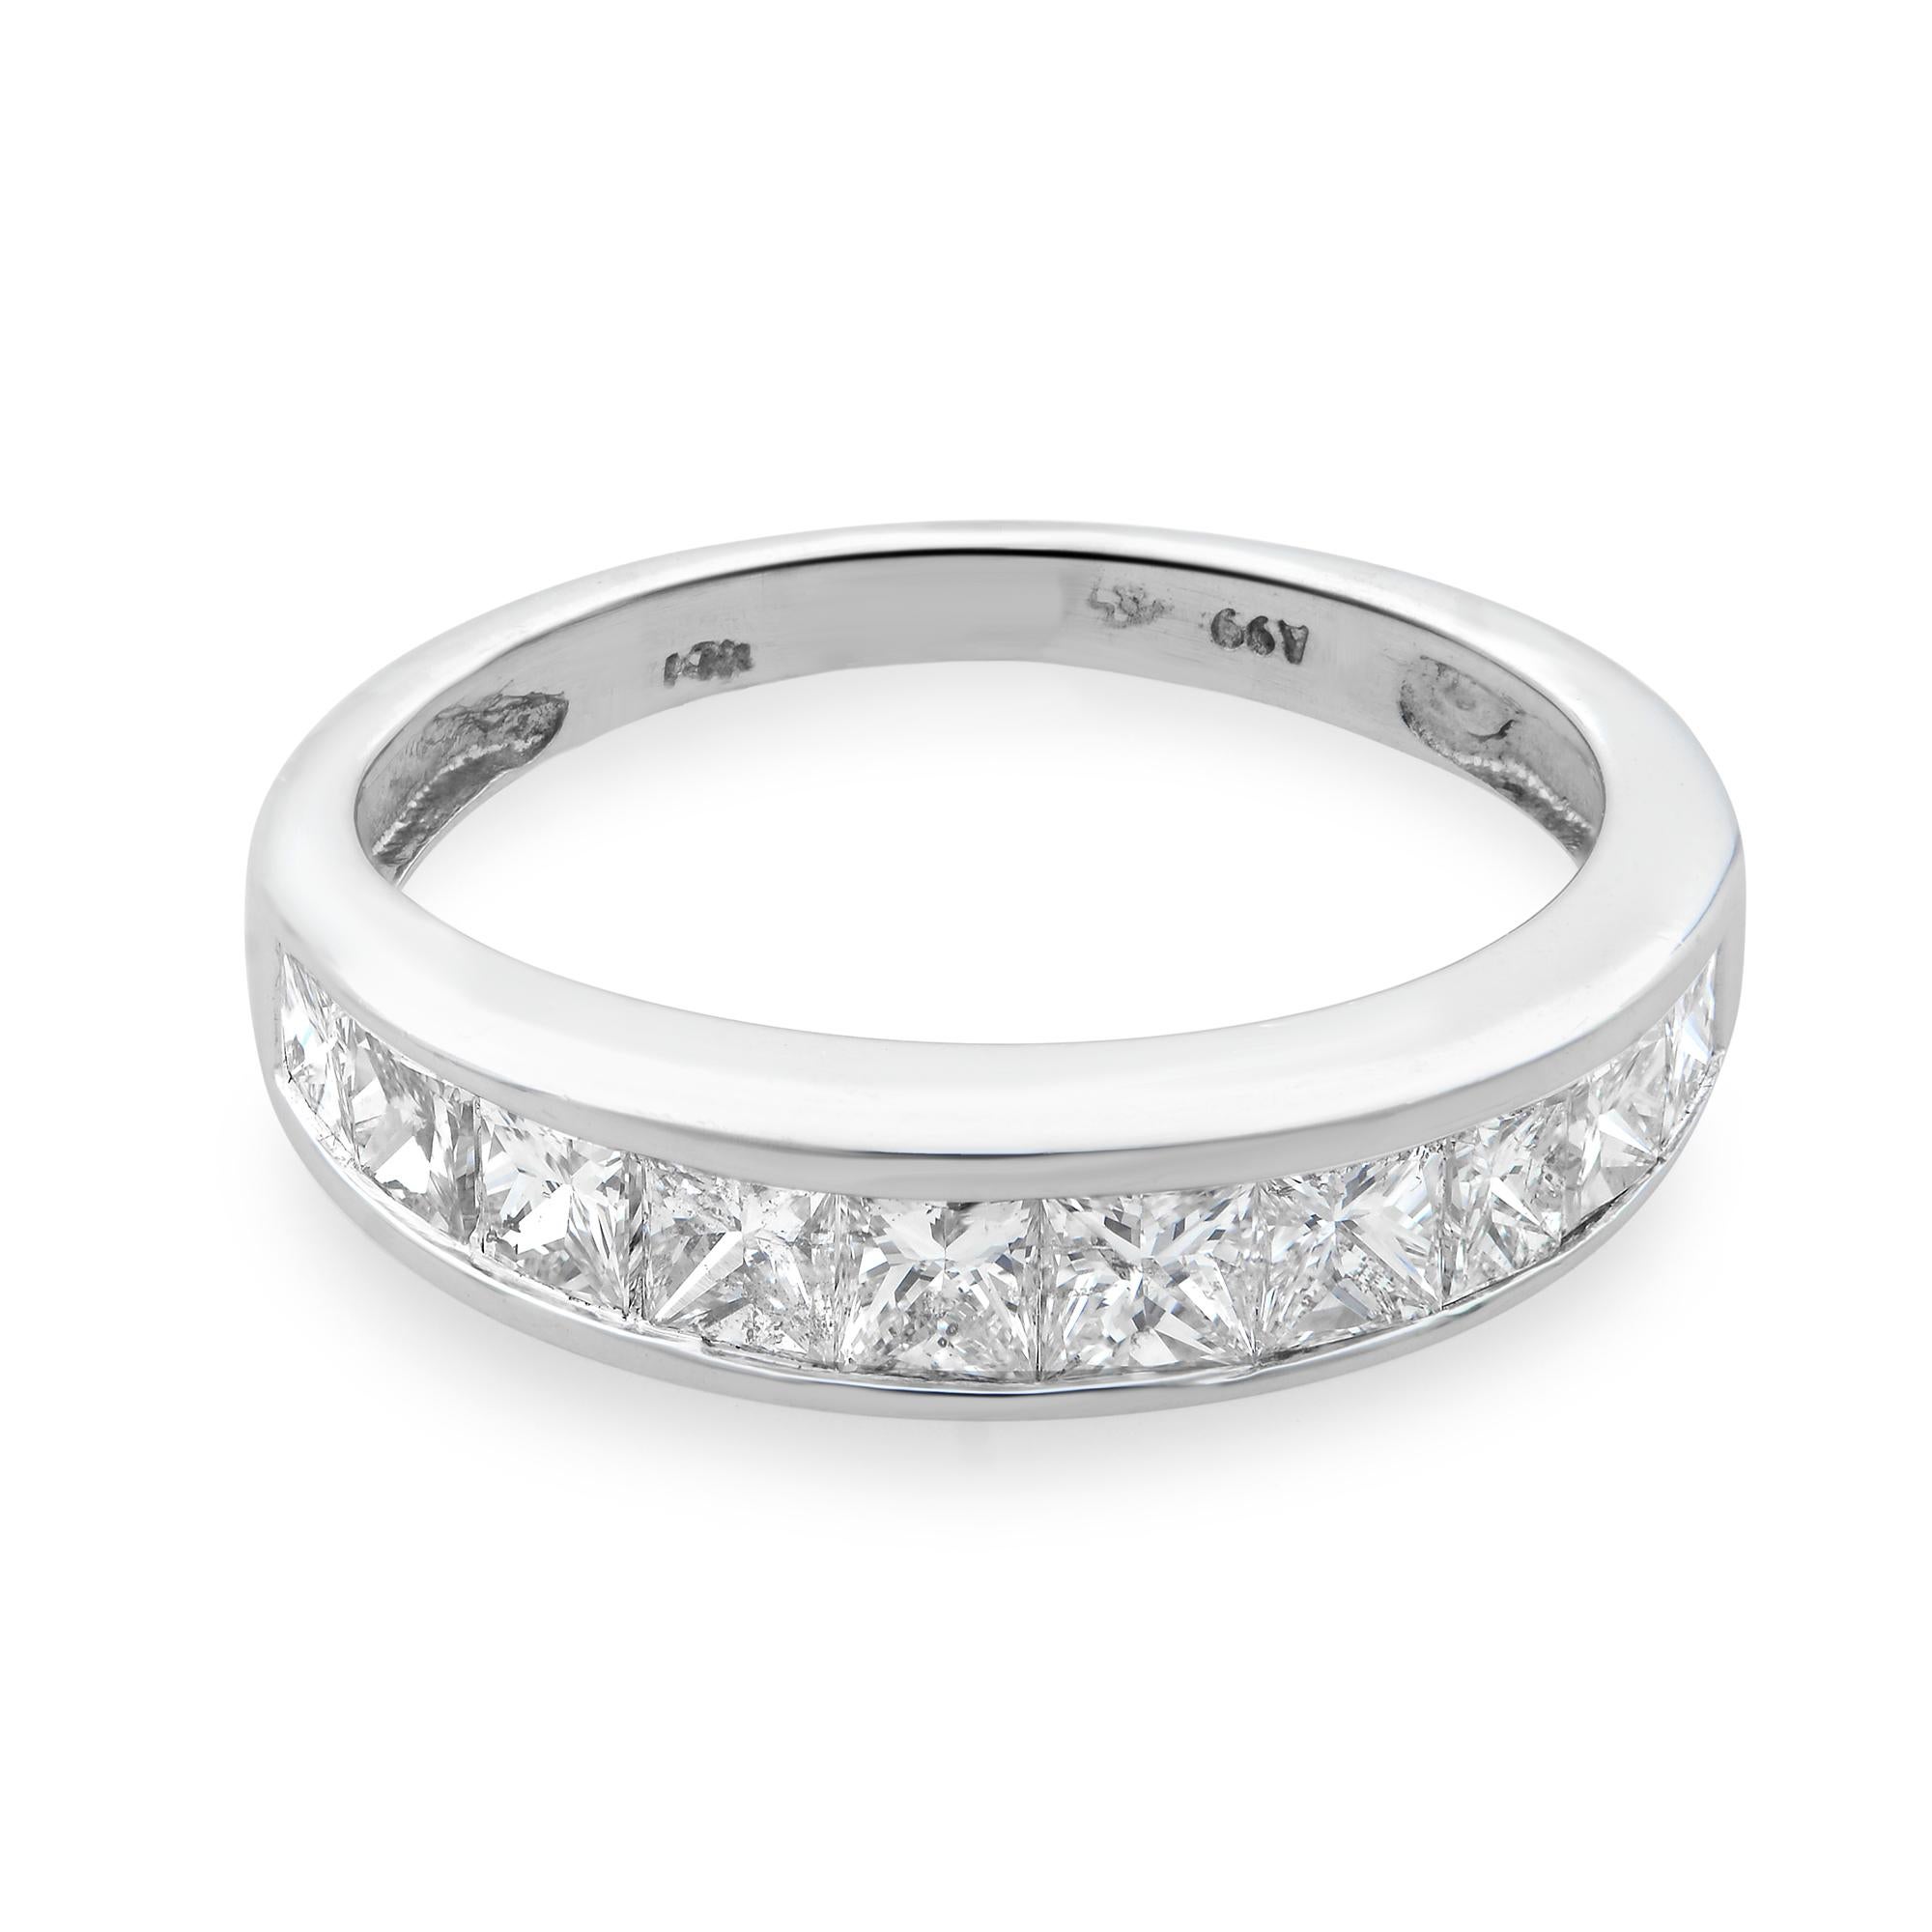 14k white gold diamond princess cut ladies wedding band ring. Channel setting. Total carat weight: 1.00. Diamond color J, diamond clarity SI2. Ring size 5. Width of the ring 4.11mm. Comes with a presentable gift box.